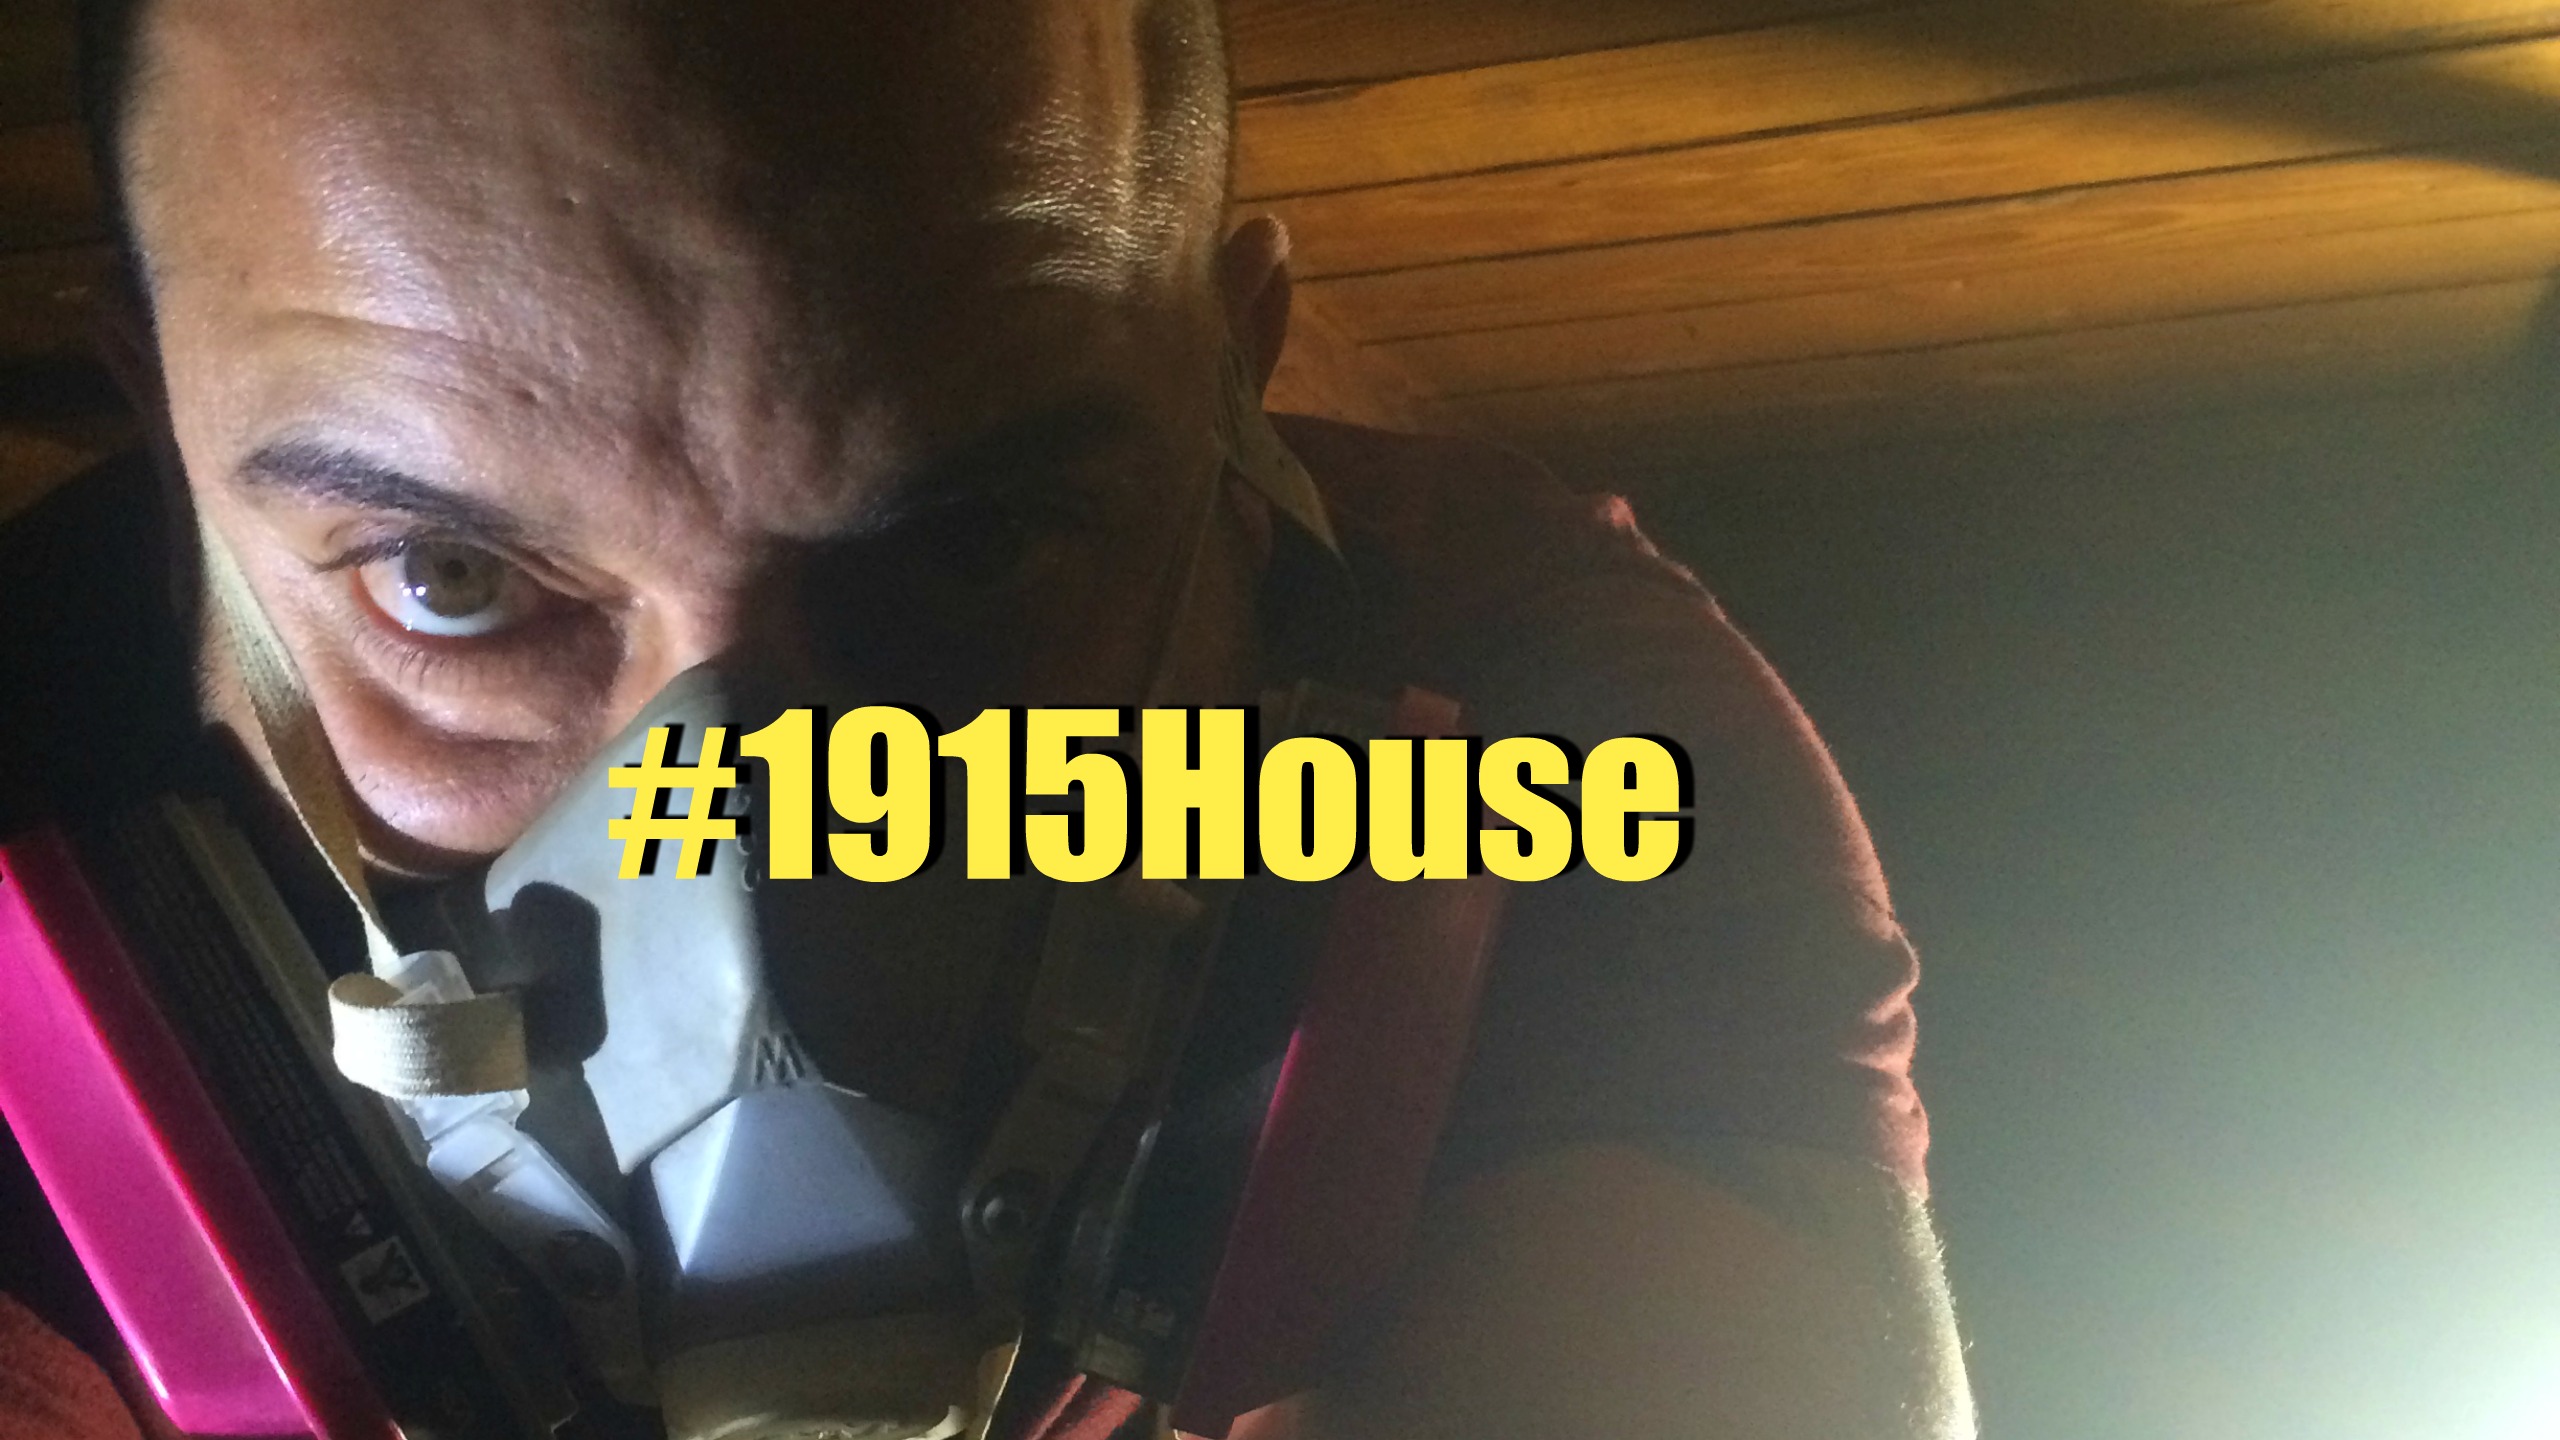 What is happening at #1915House?